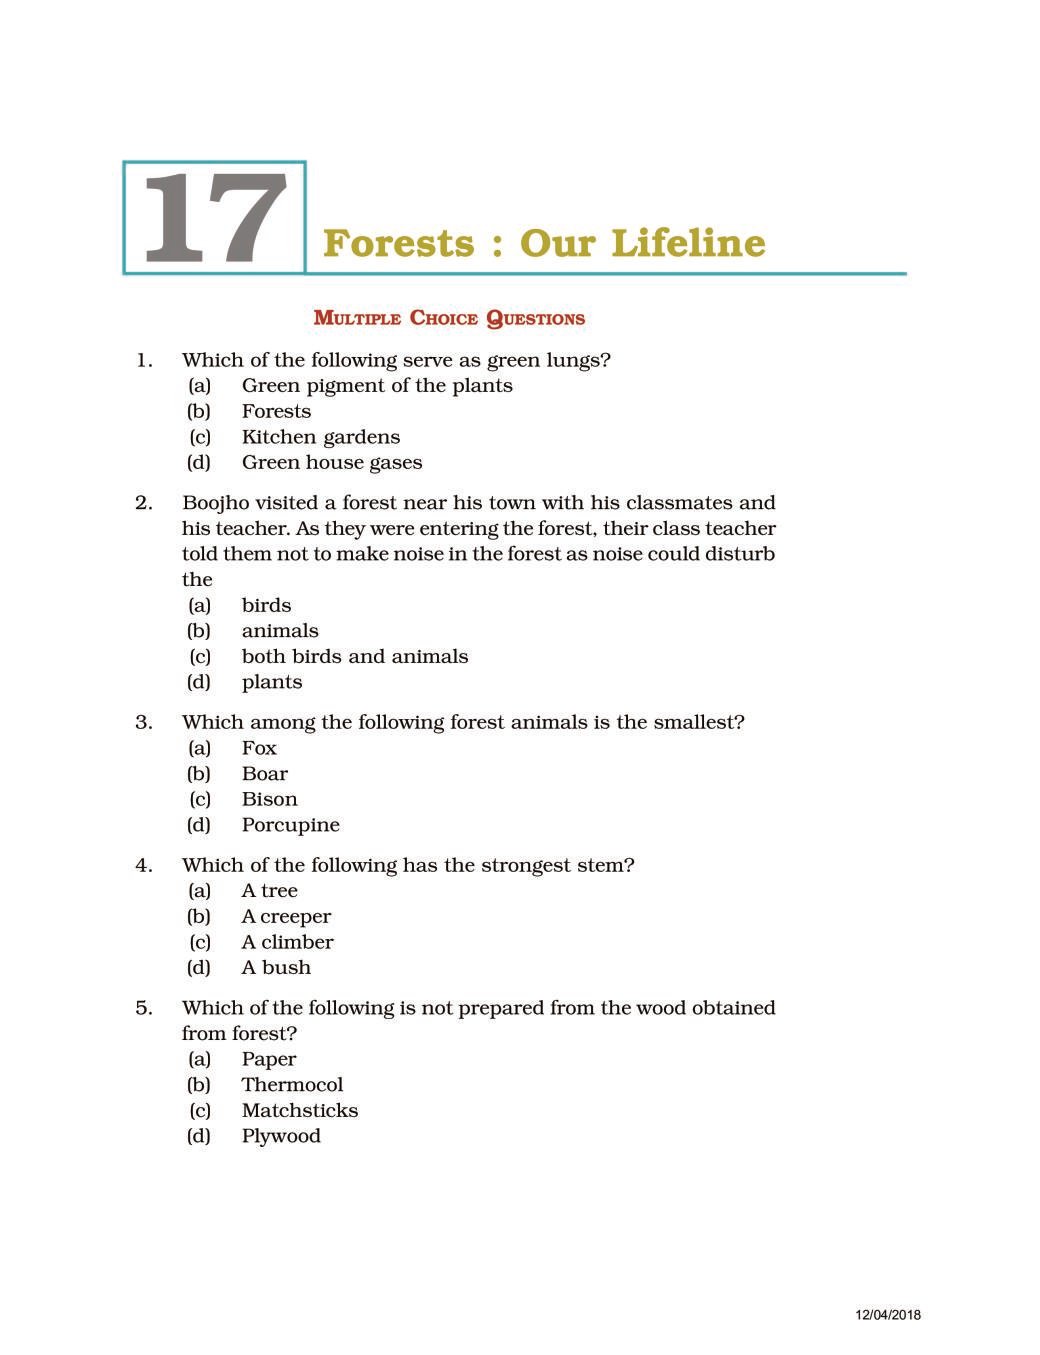 NCERT Exemplar Class 07 Science Unit 17 Forests Our Lifeline - Page 1